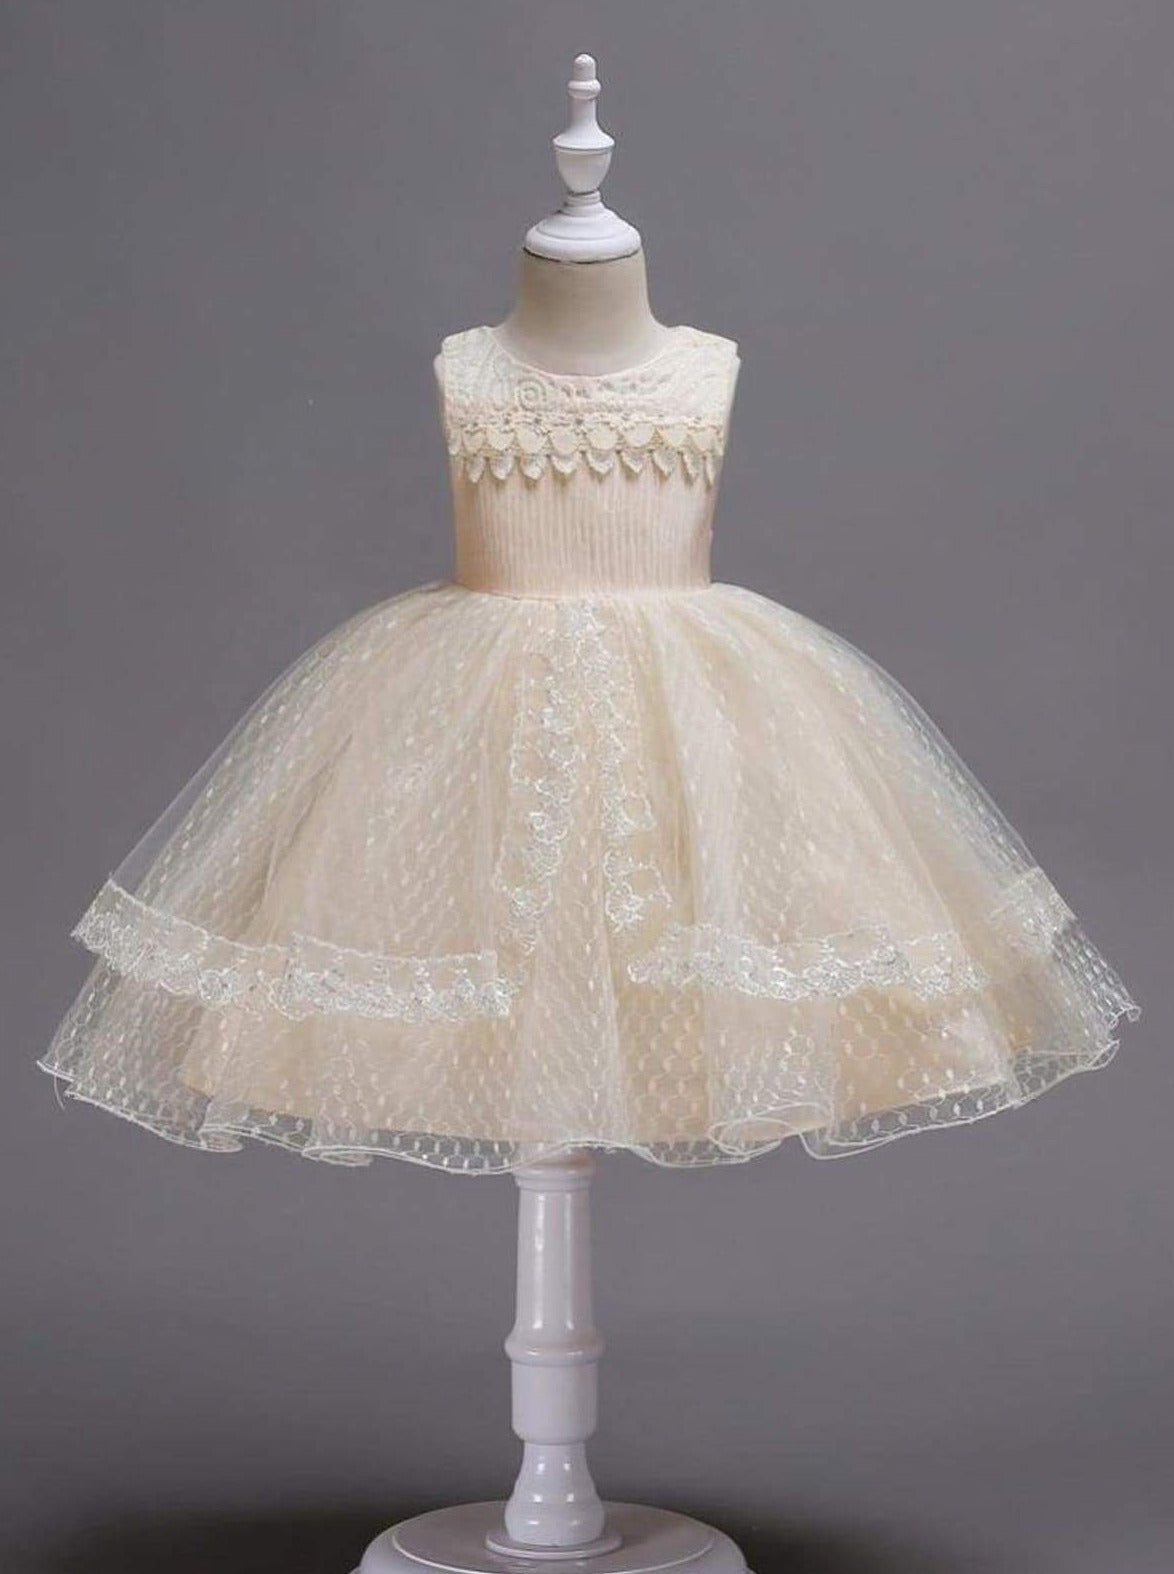 Girls Lace Sleeveless Floral Applique Tiered Lace Special Occasion Dress - Champagne / 3T - Girls Fall Dressy Dress